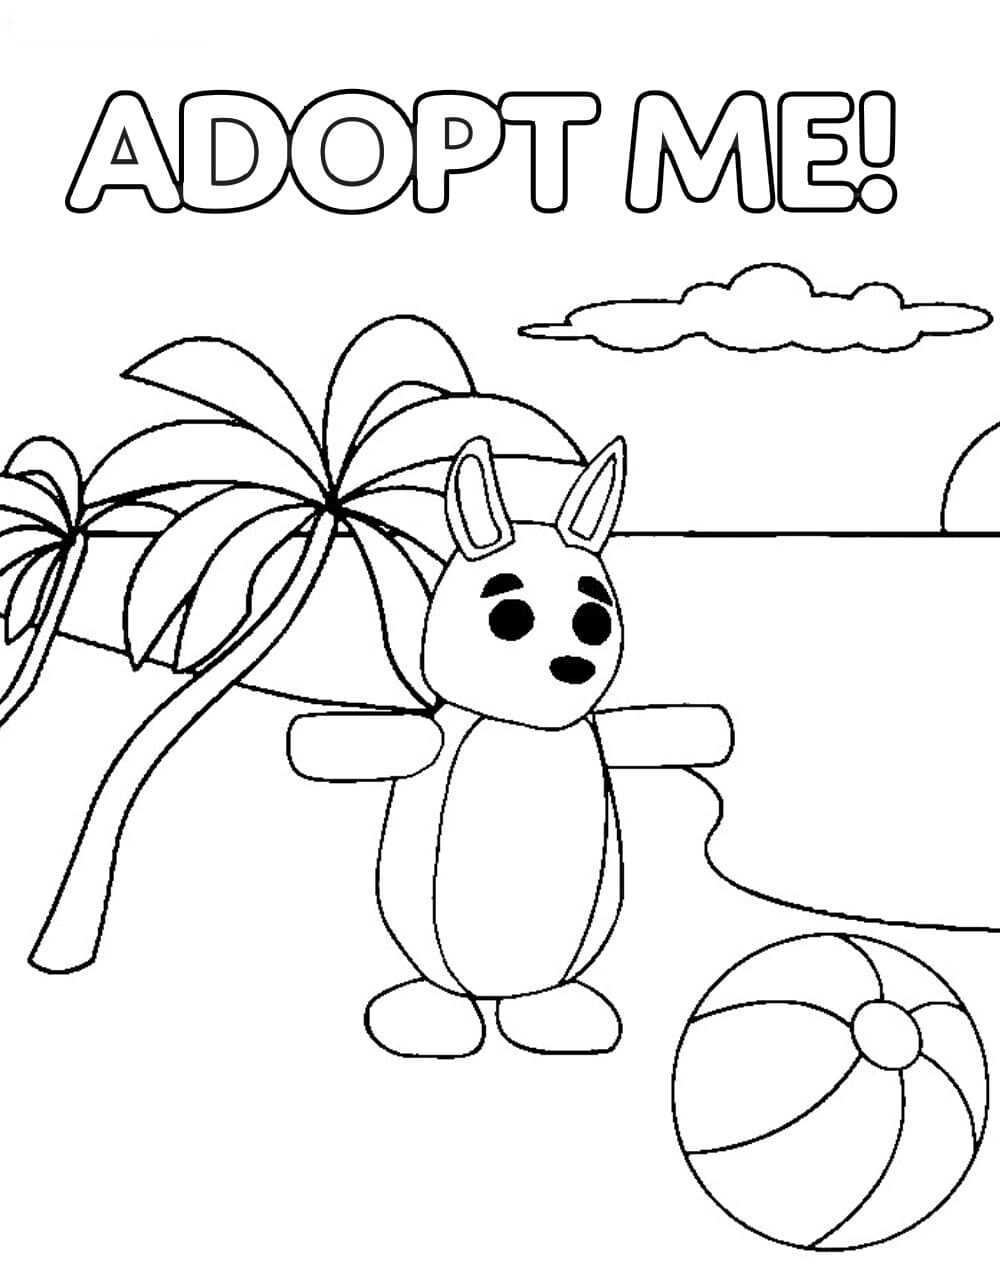 The Kangaroo from Adopt me plays ball at the beach Coloring Pages